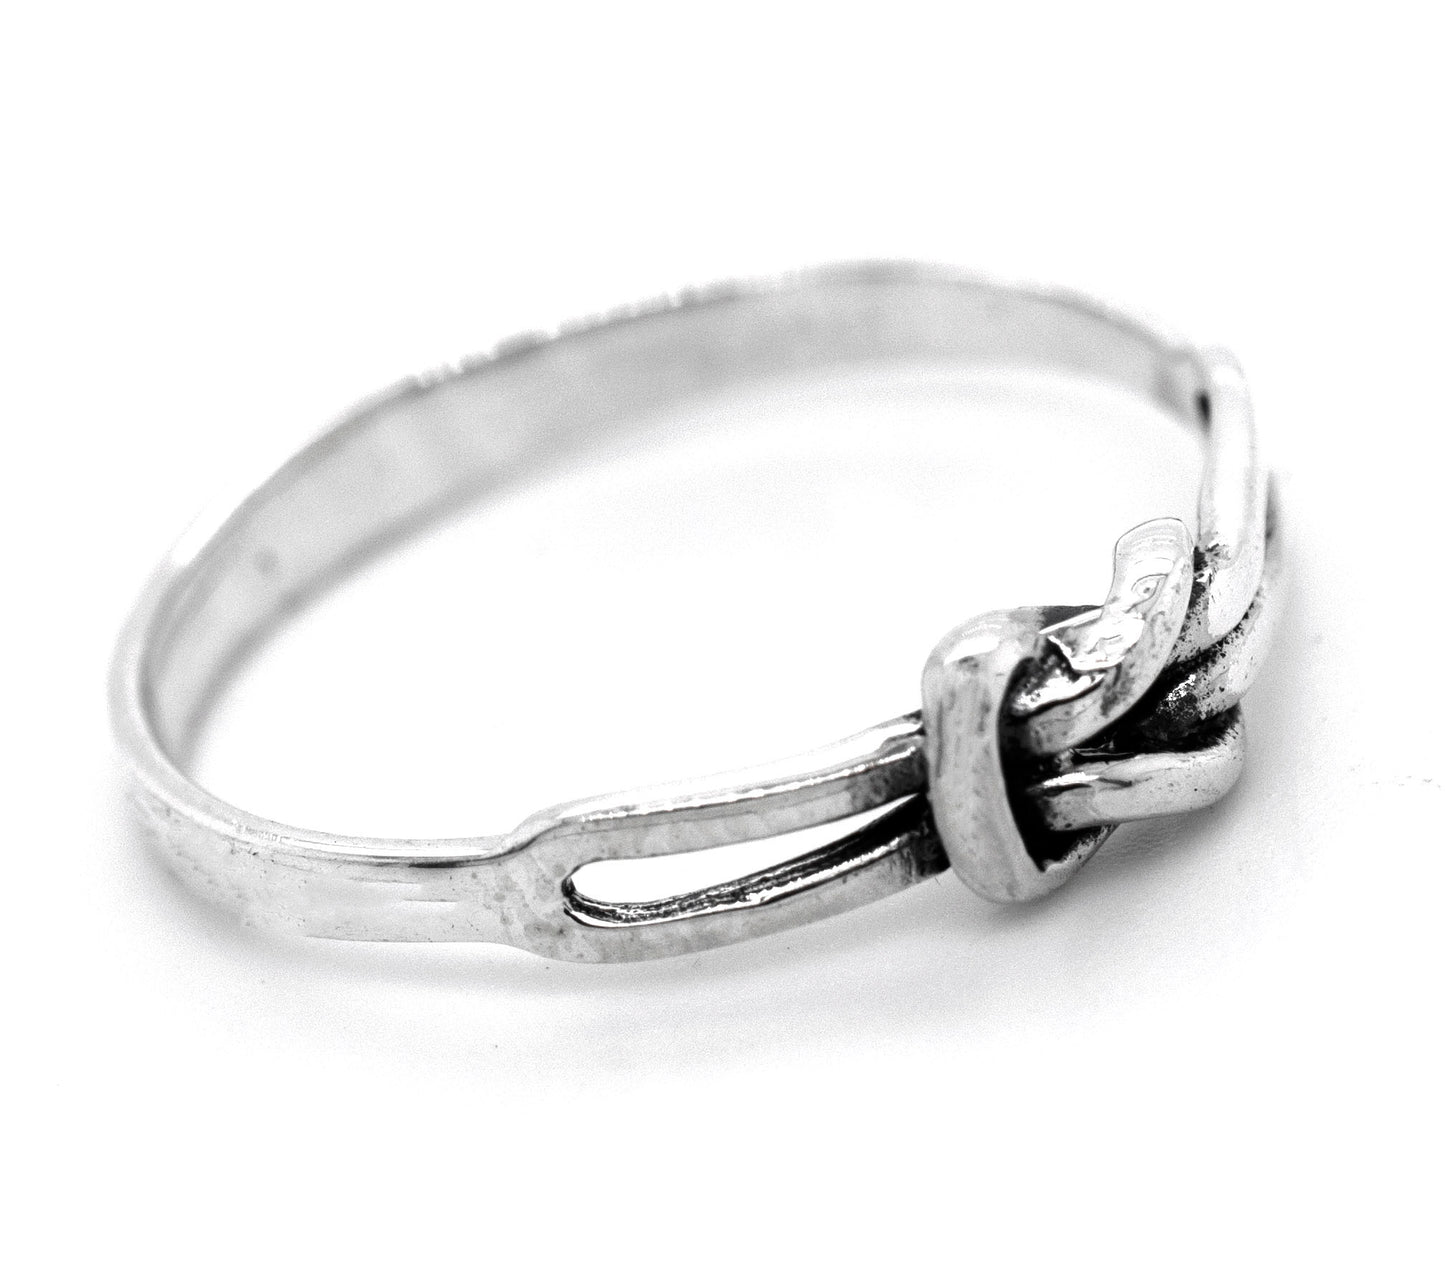 A minimalist design of the Slender Square Knot Ring with a knot on it by Super Silver.